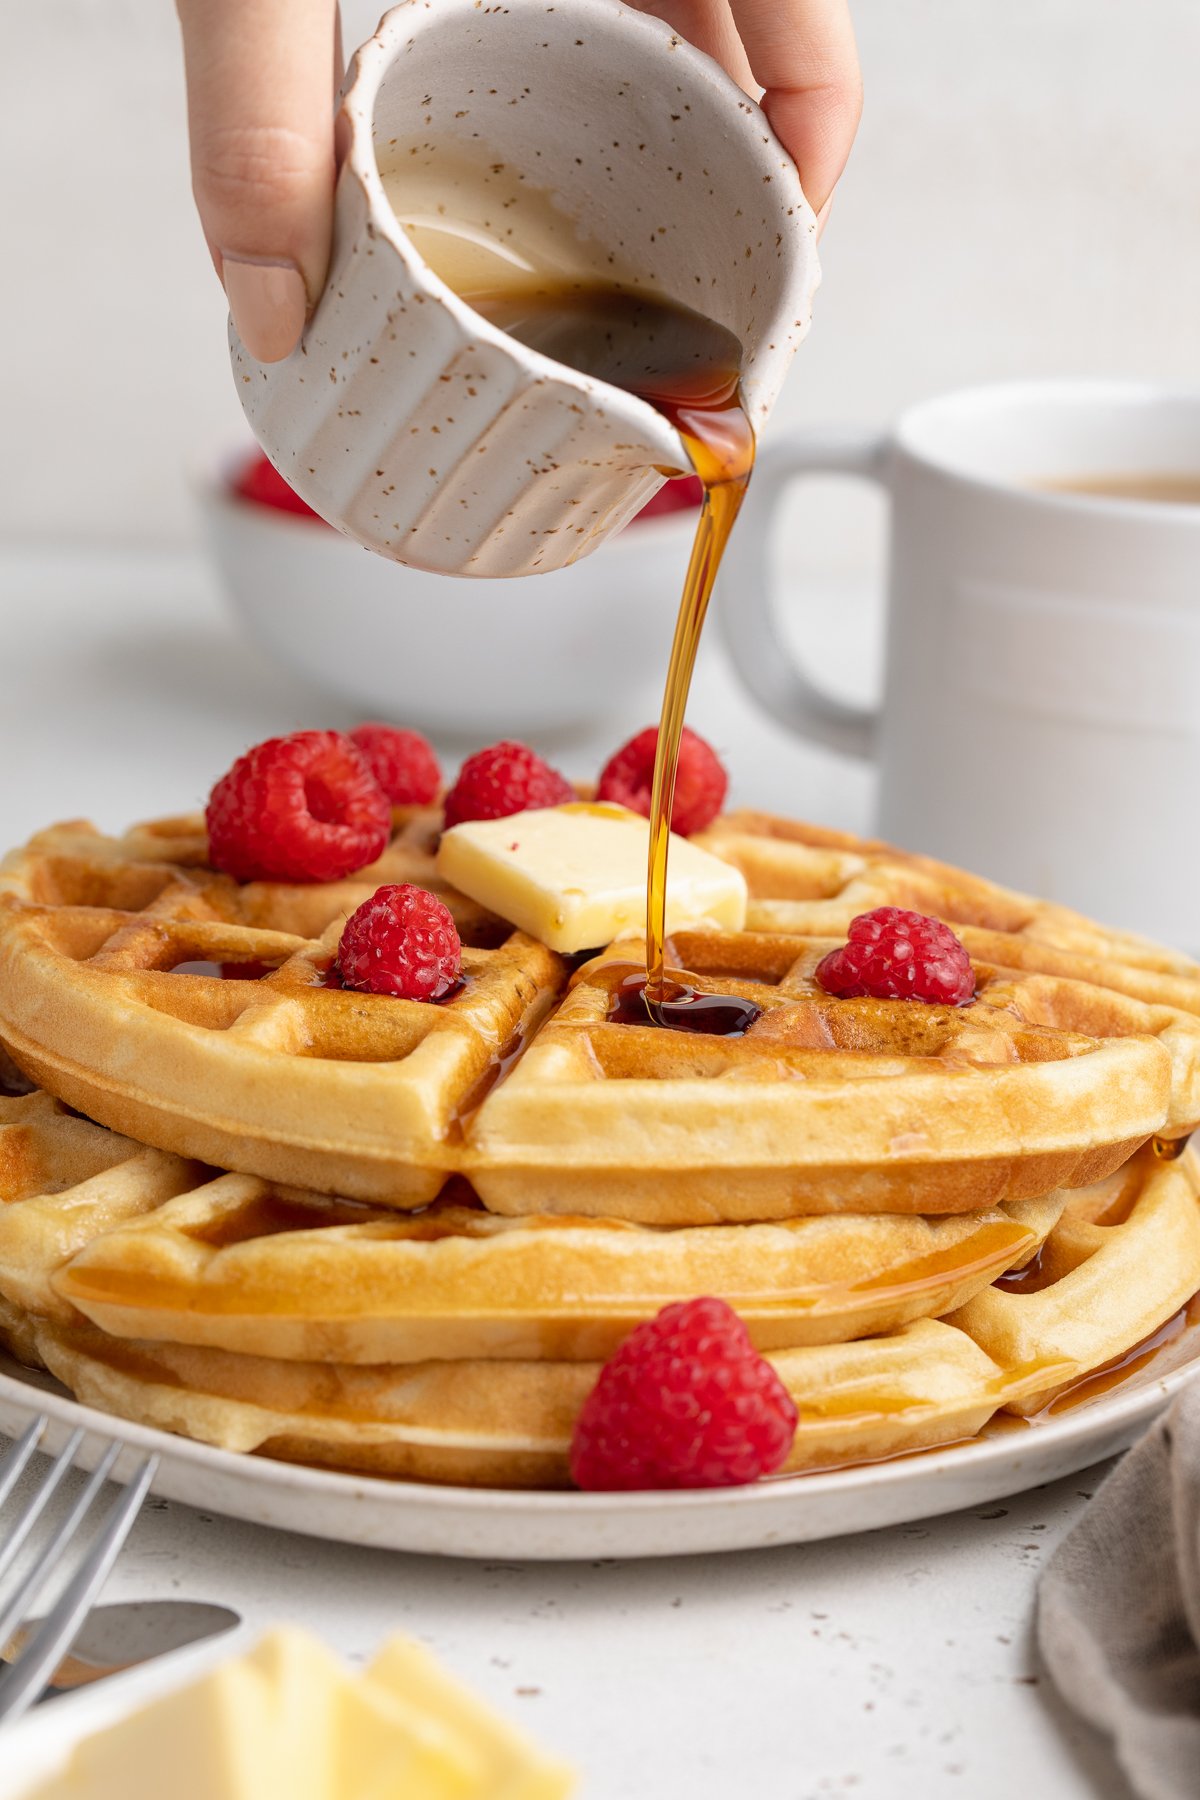 Side view of a stack of 3 round gluten-free waffles on a white plate. A hand pours syrup over the top of the waffles and onto butter and raspberries.